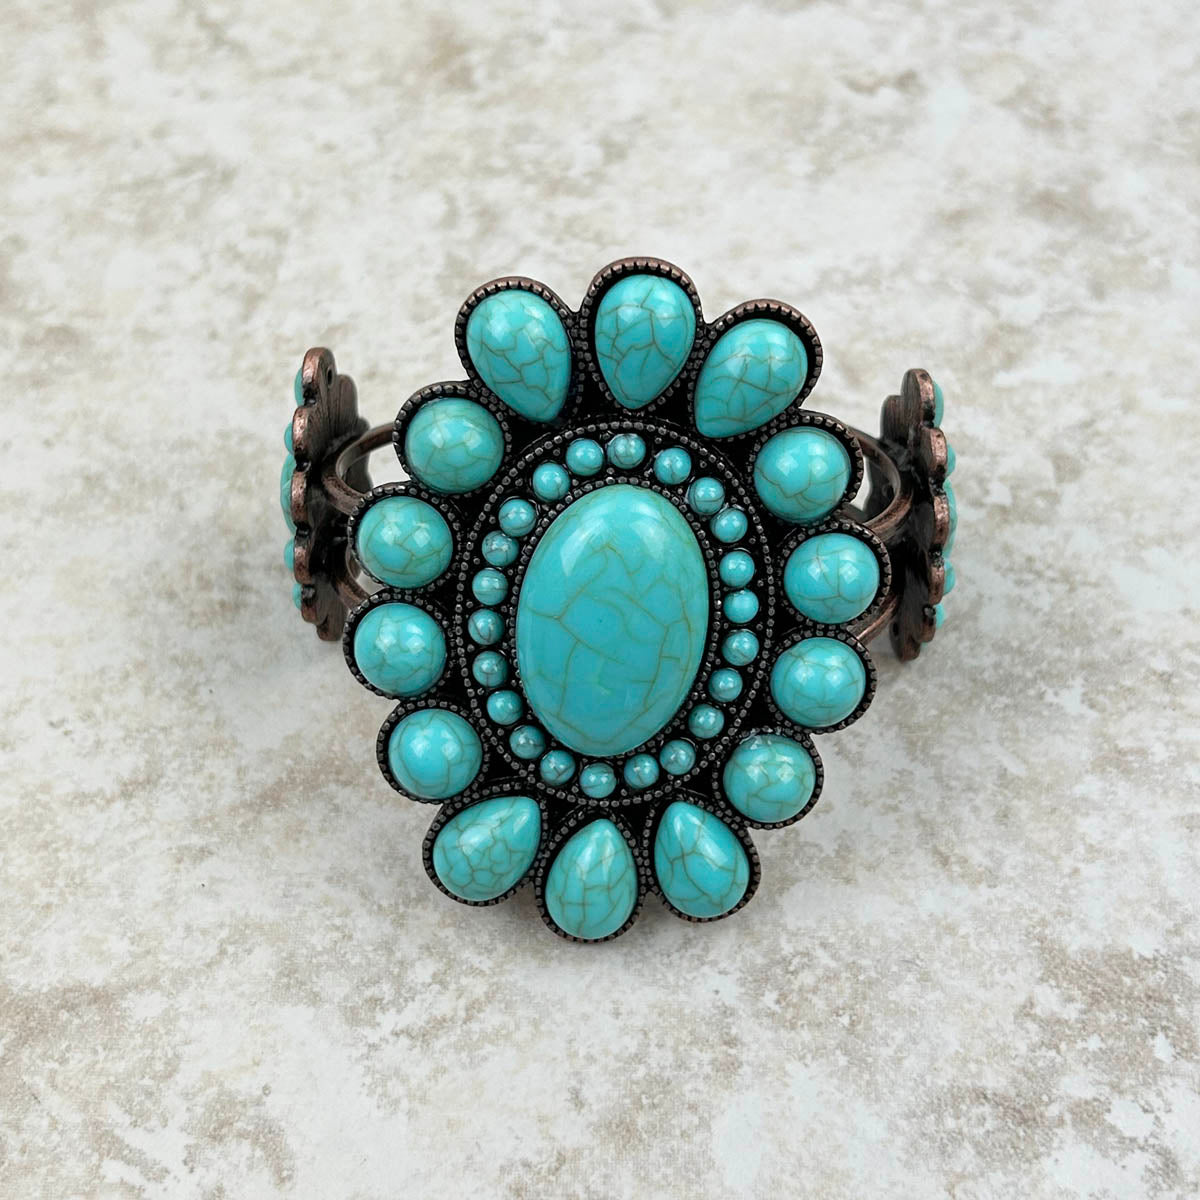 Cooper with Blue Turquoise stone Concho Cuff Bracelet